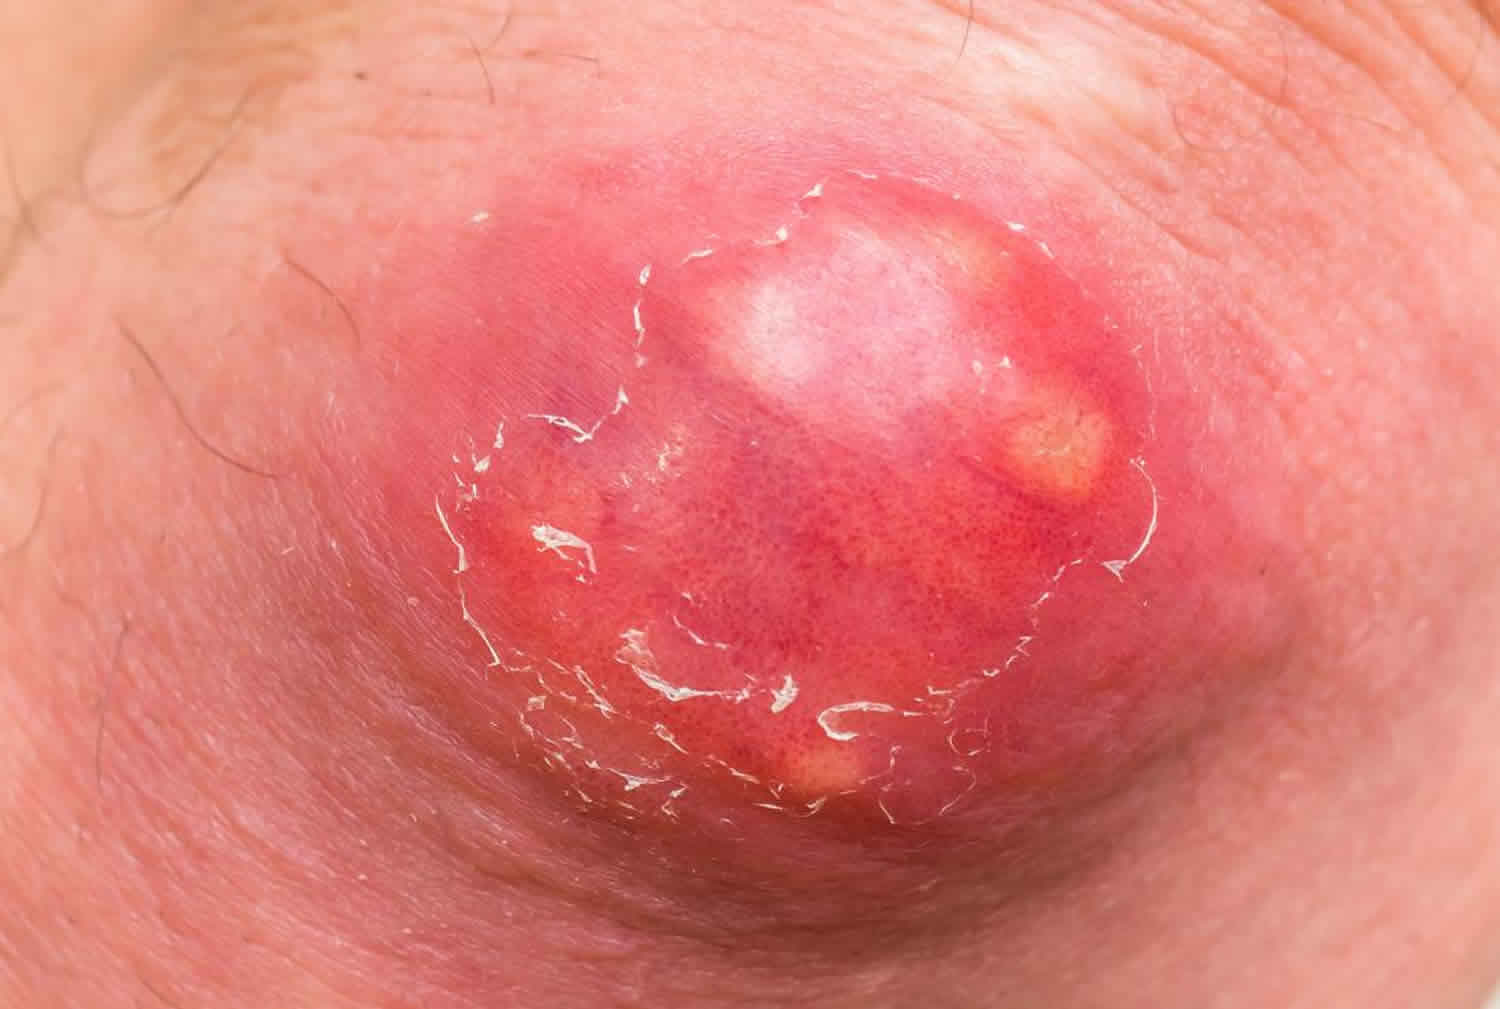 Abscess Causes, Signs, Symptoms, Types And How To Treat An Abscess-3211